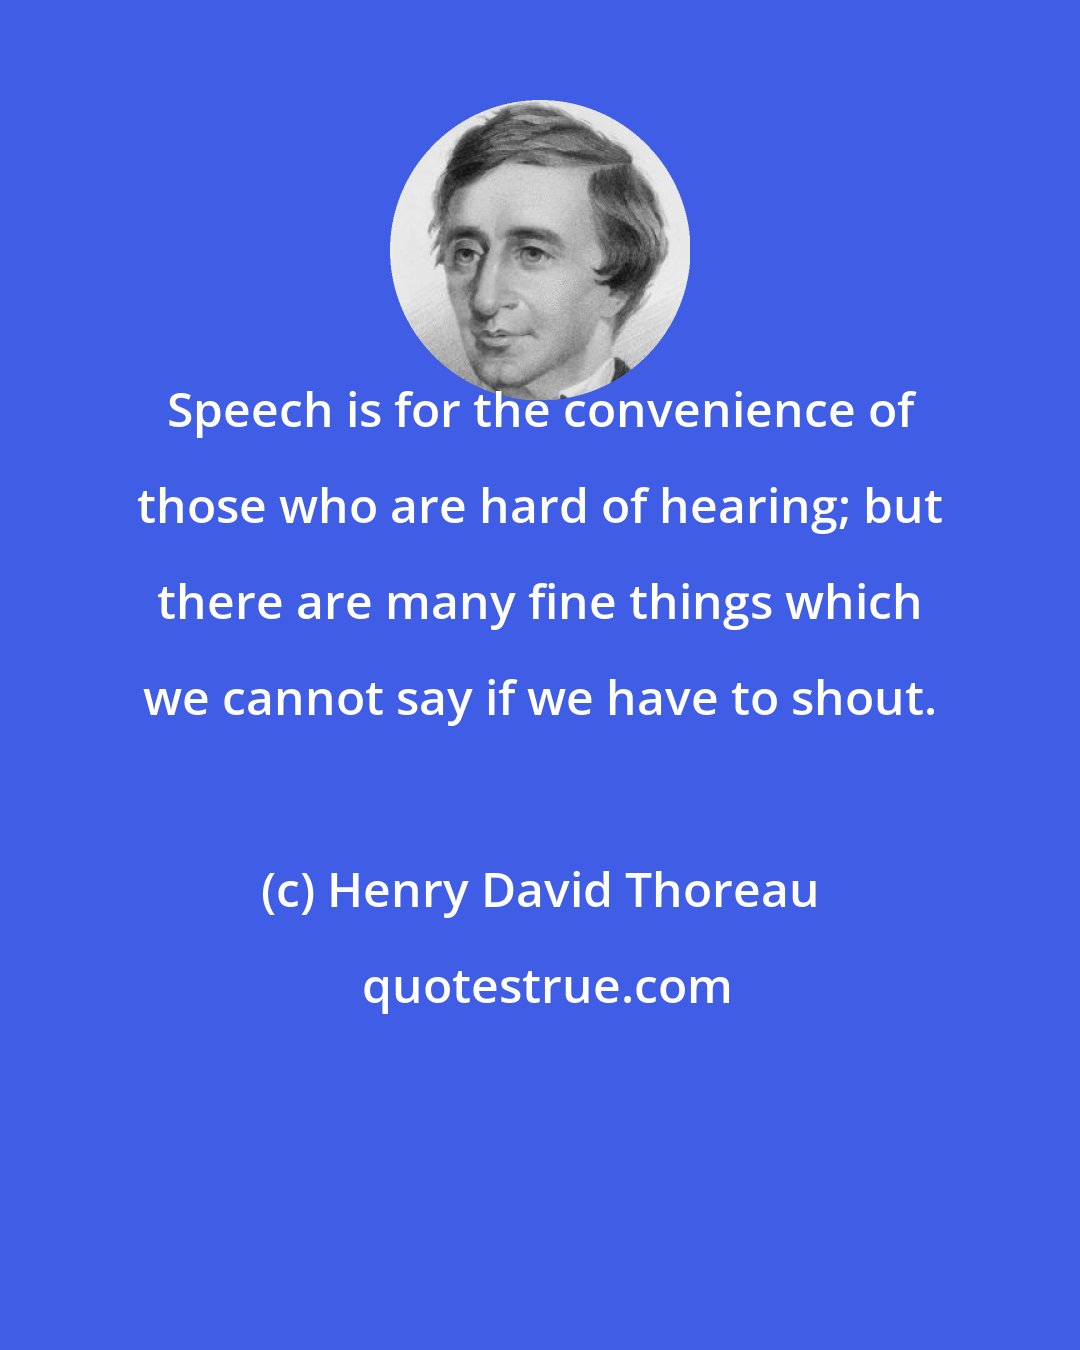 Henry David Thoreau: Speech is for the convenience of those who are hard of hearing; but there are many fine things which we cannot say if we have to shout.